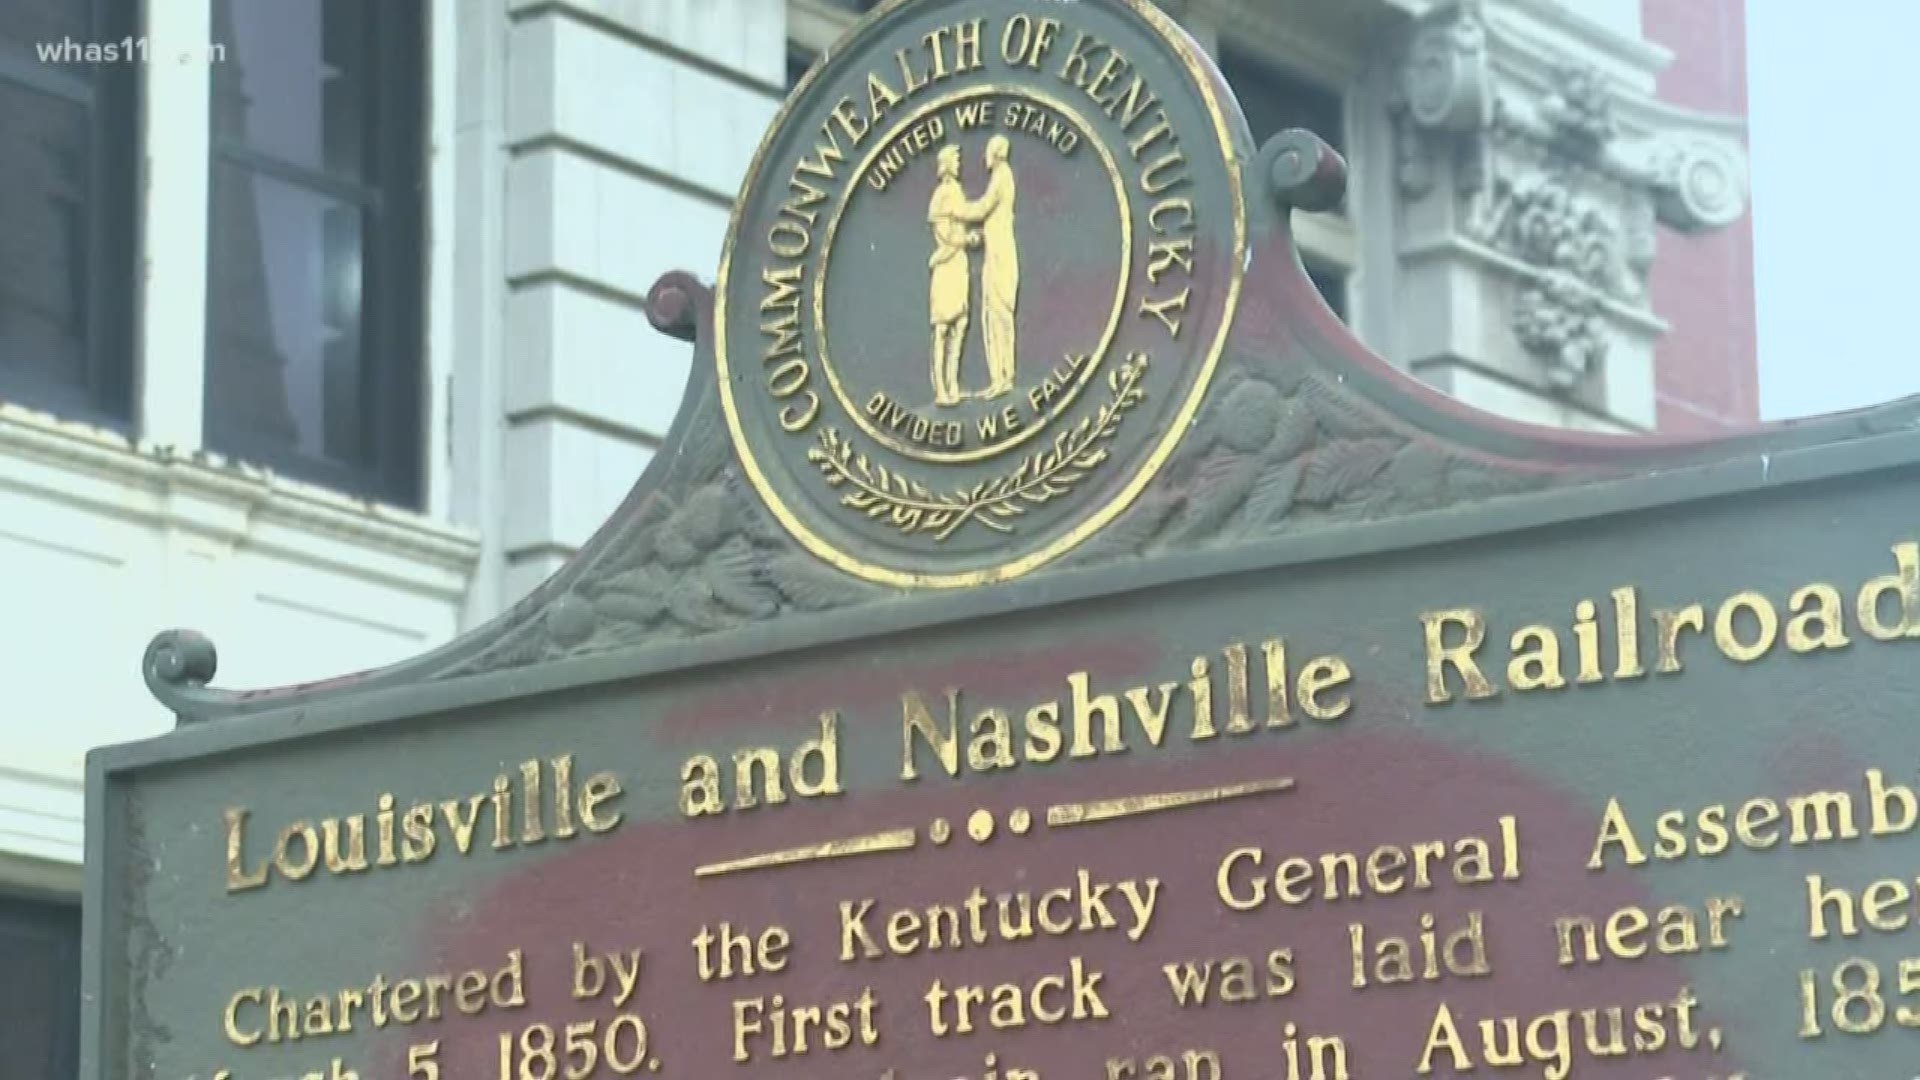 The first L&N train to Nashville was in 1859 after the completion of the Louisville and Nashville railroad.